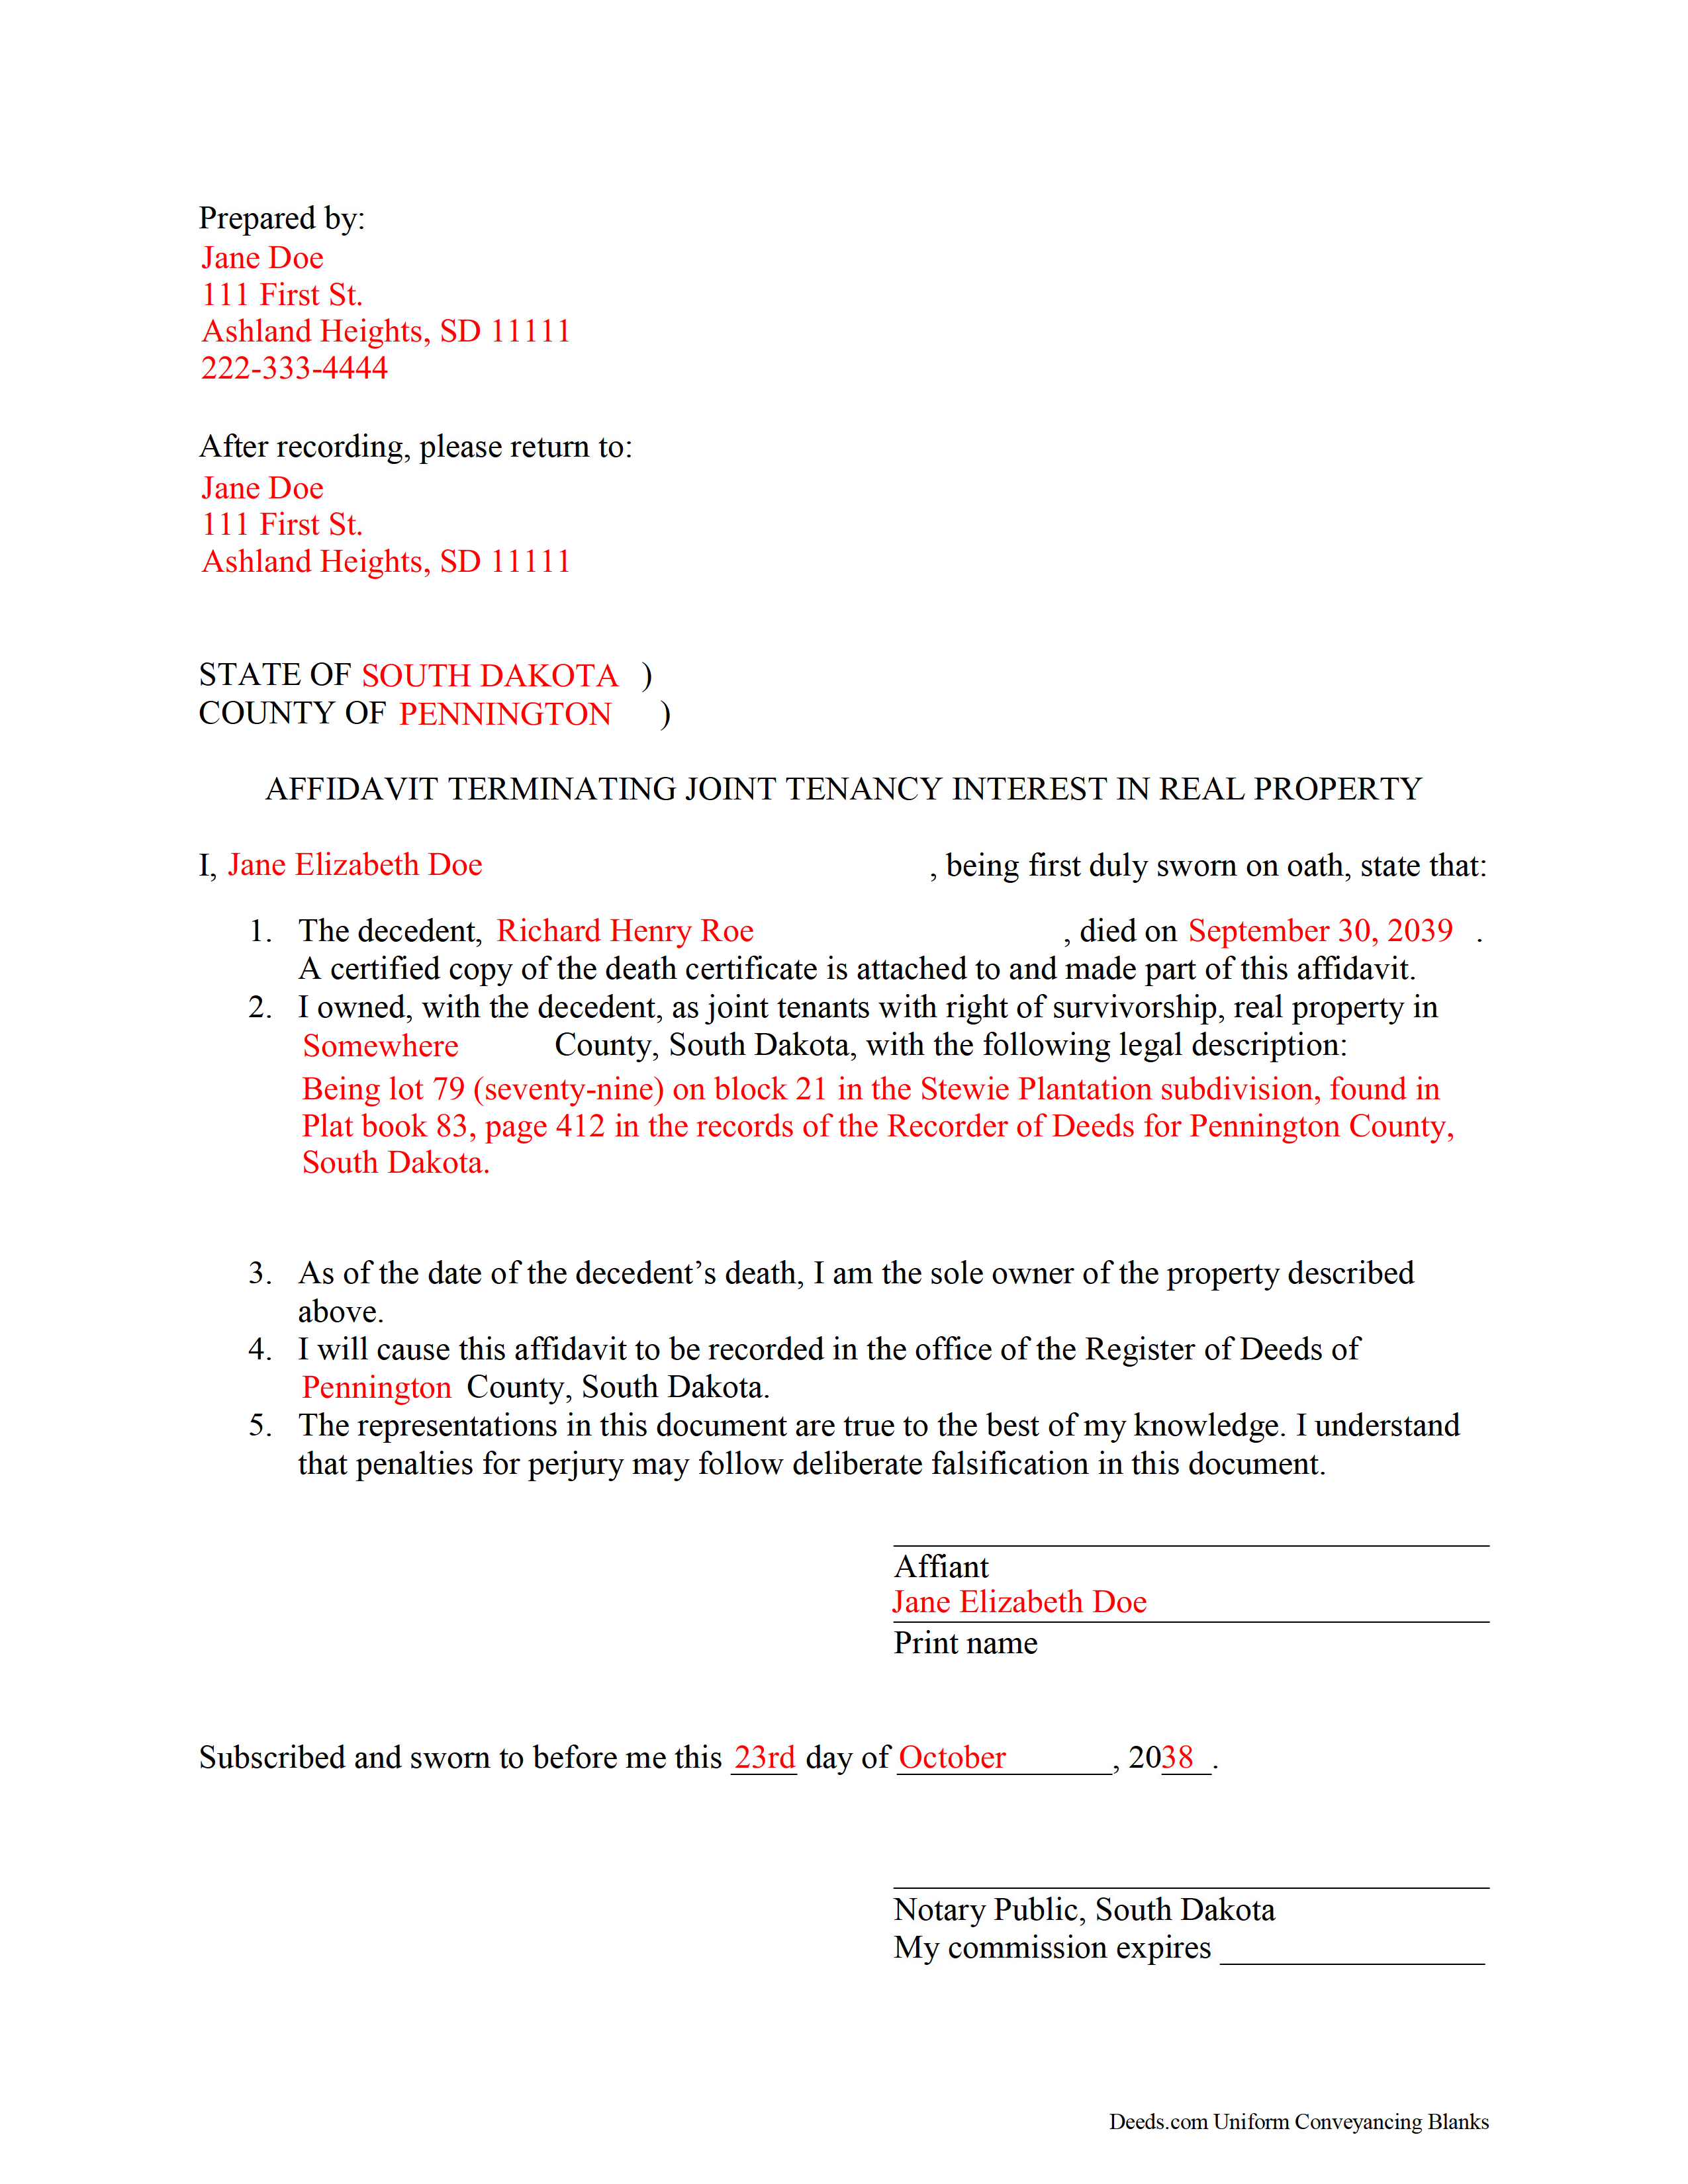 Completed Example of the Affidavit of Deceased Joint Tenant Document